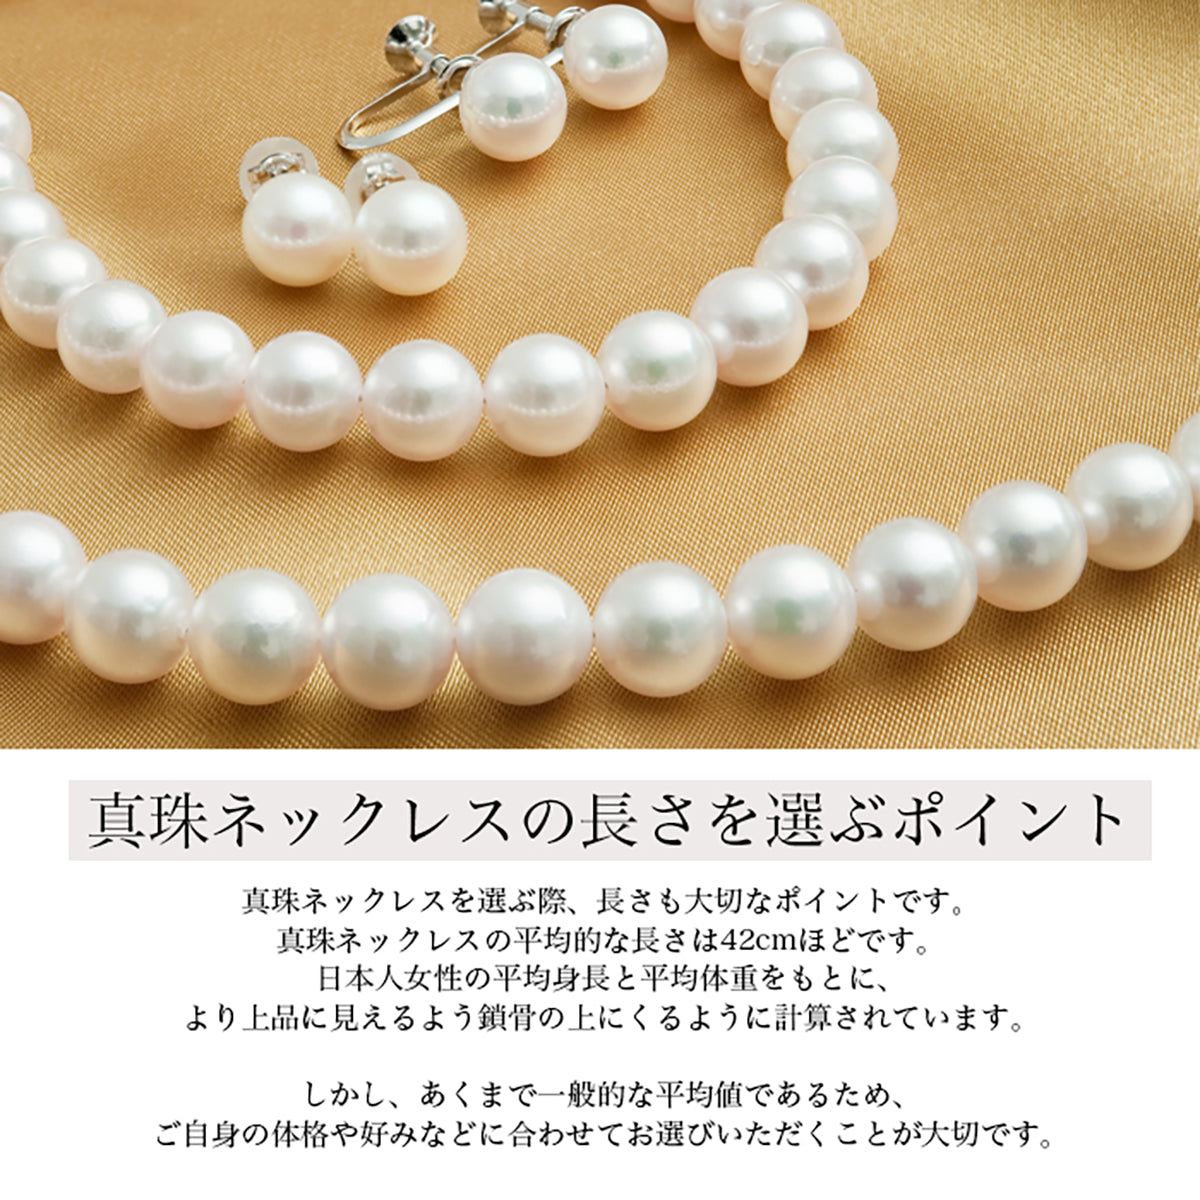 [Natural White] [Hanadama Pearl] Uncolored Formal Necklace Set of 2 [7.5-8.0mm] (Earrings/Earrings) Akoya Pearl Certificate of Authenticity with Storage Case for Ceremonial Occasions